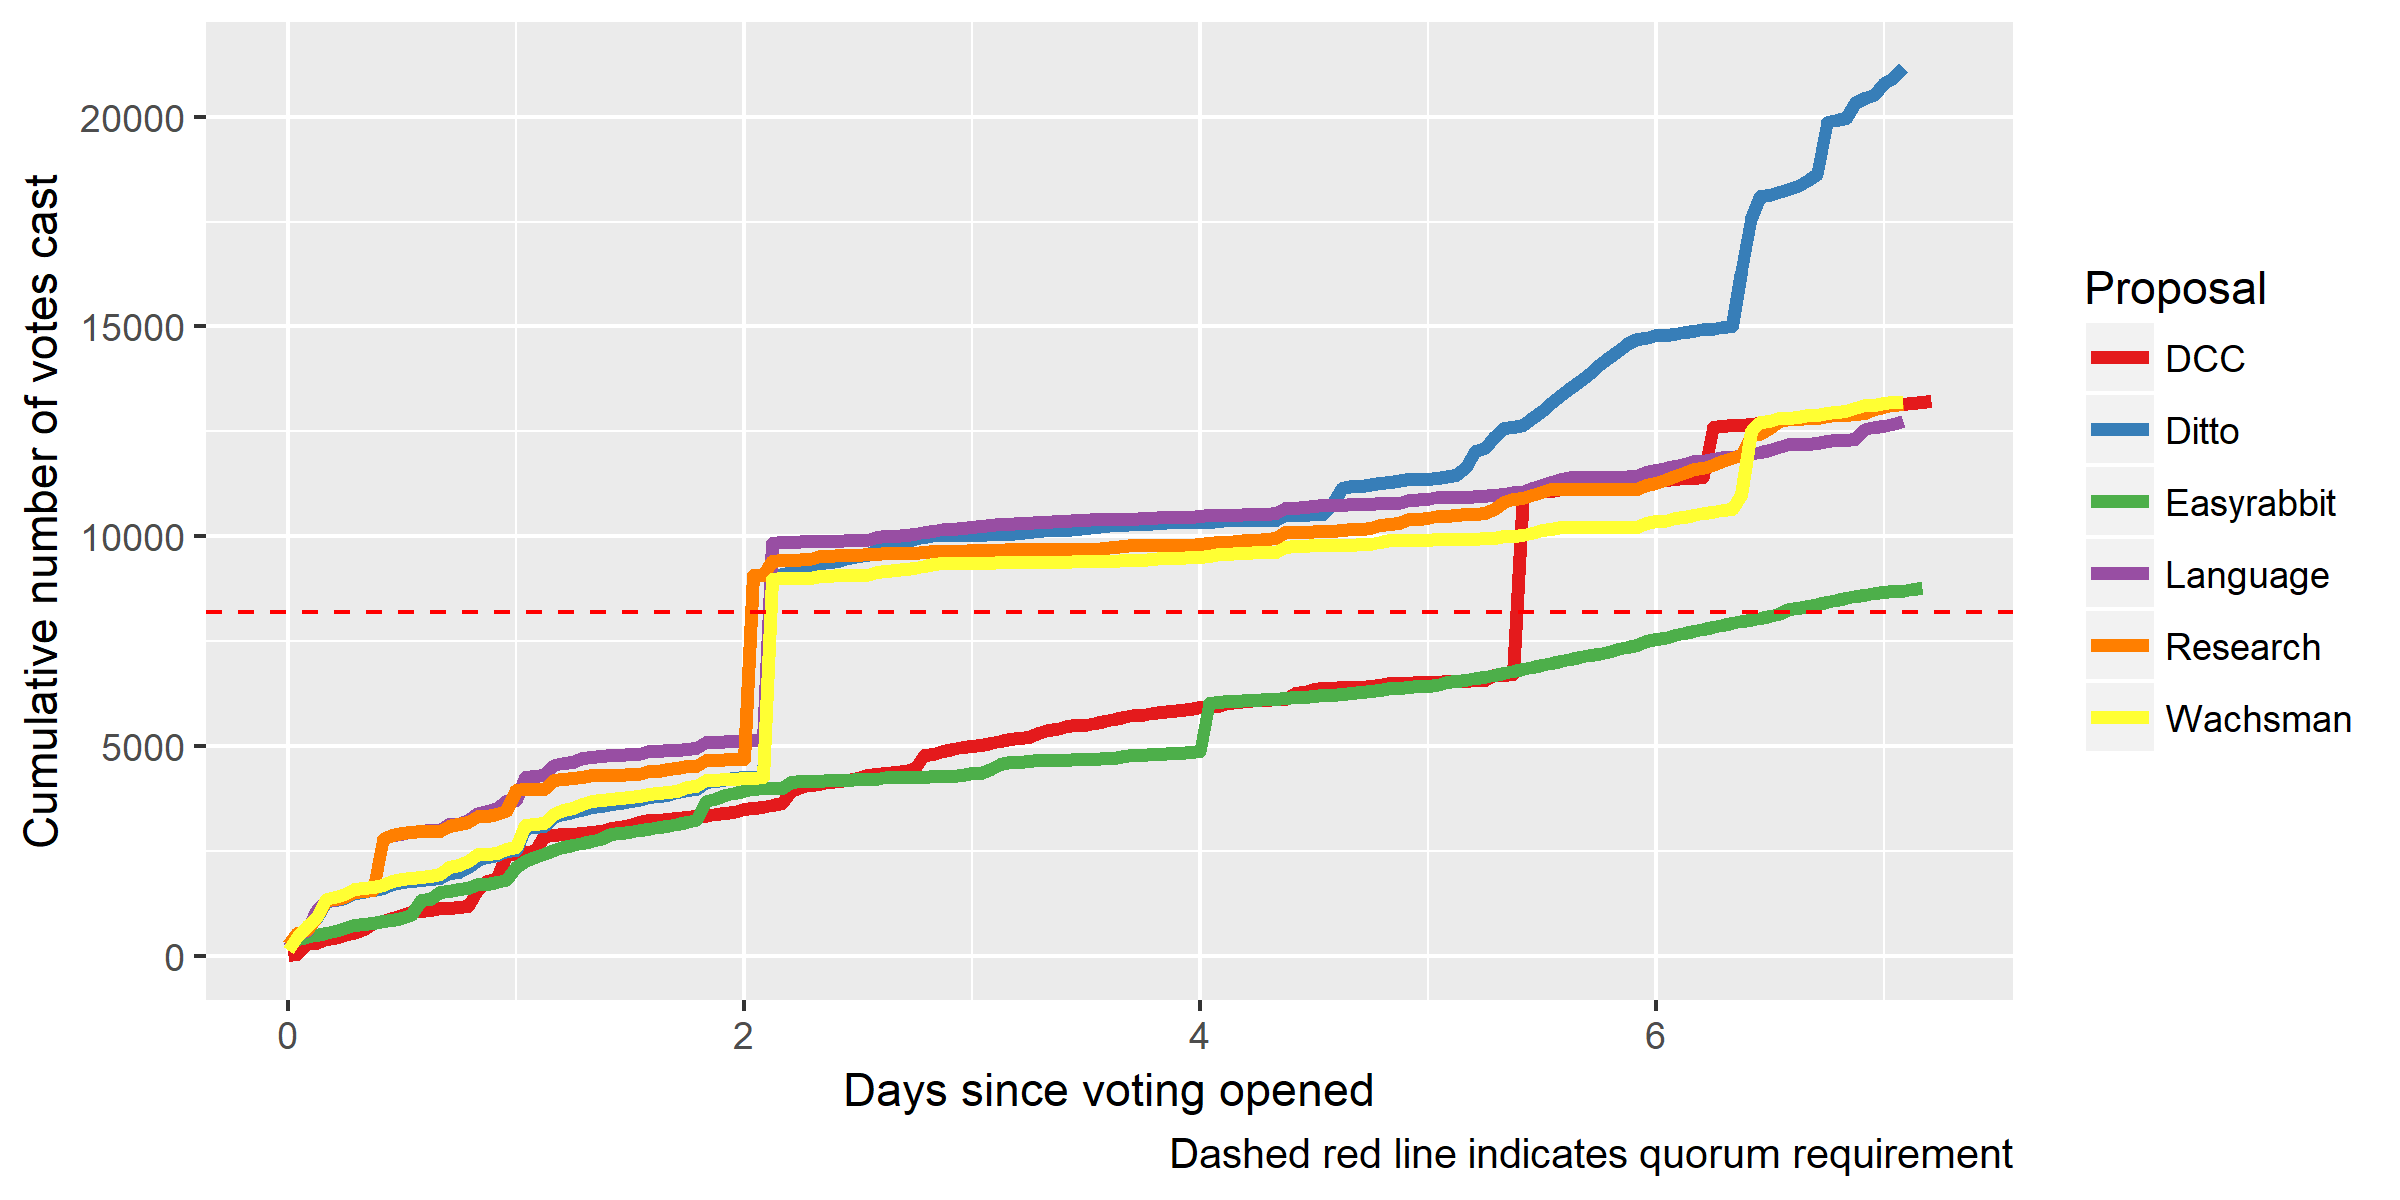 Proposal ticket votes over time